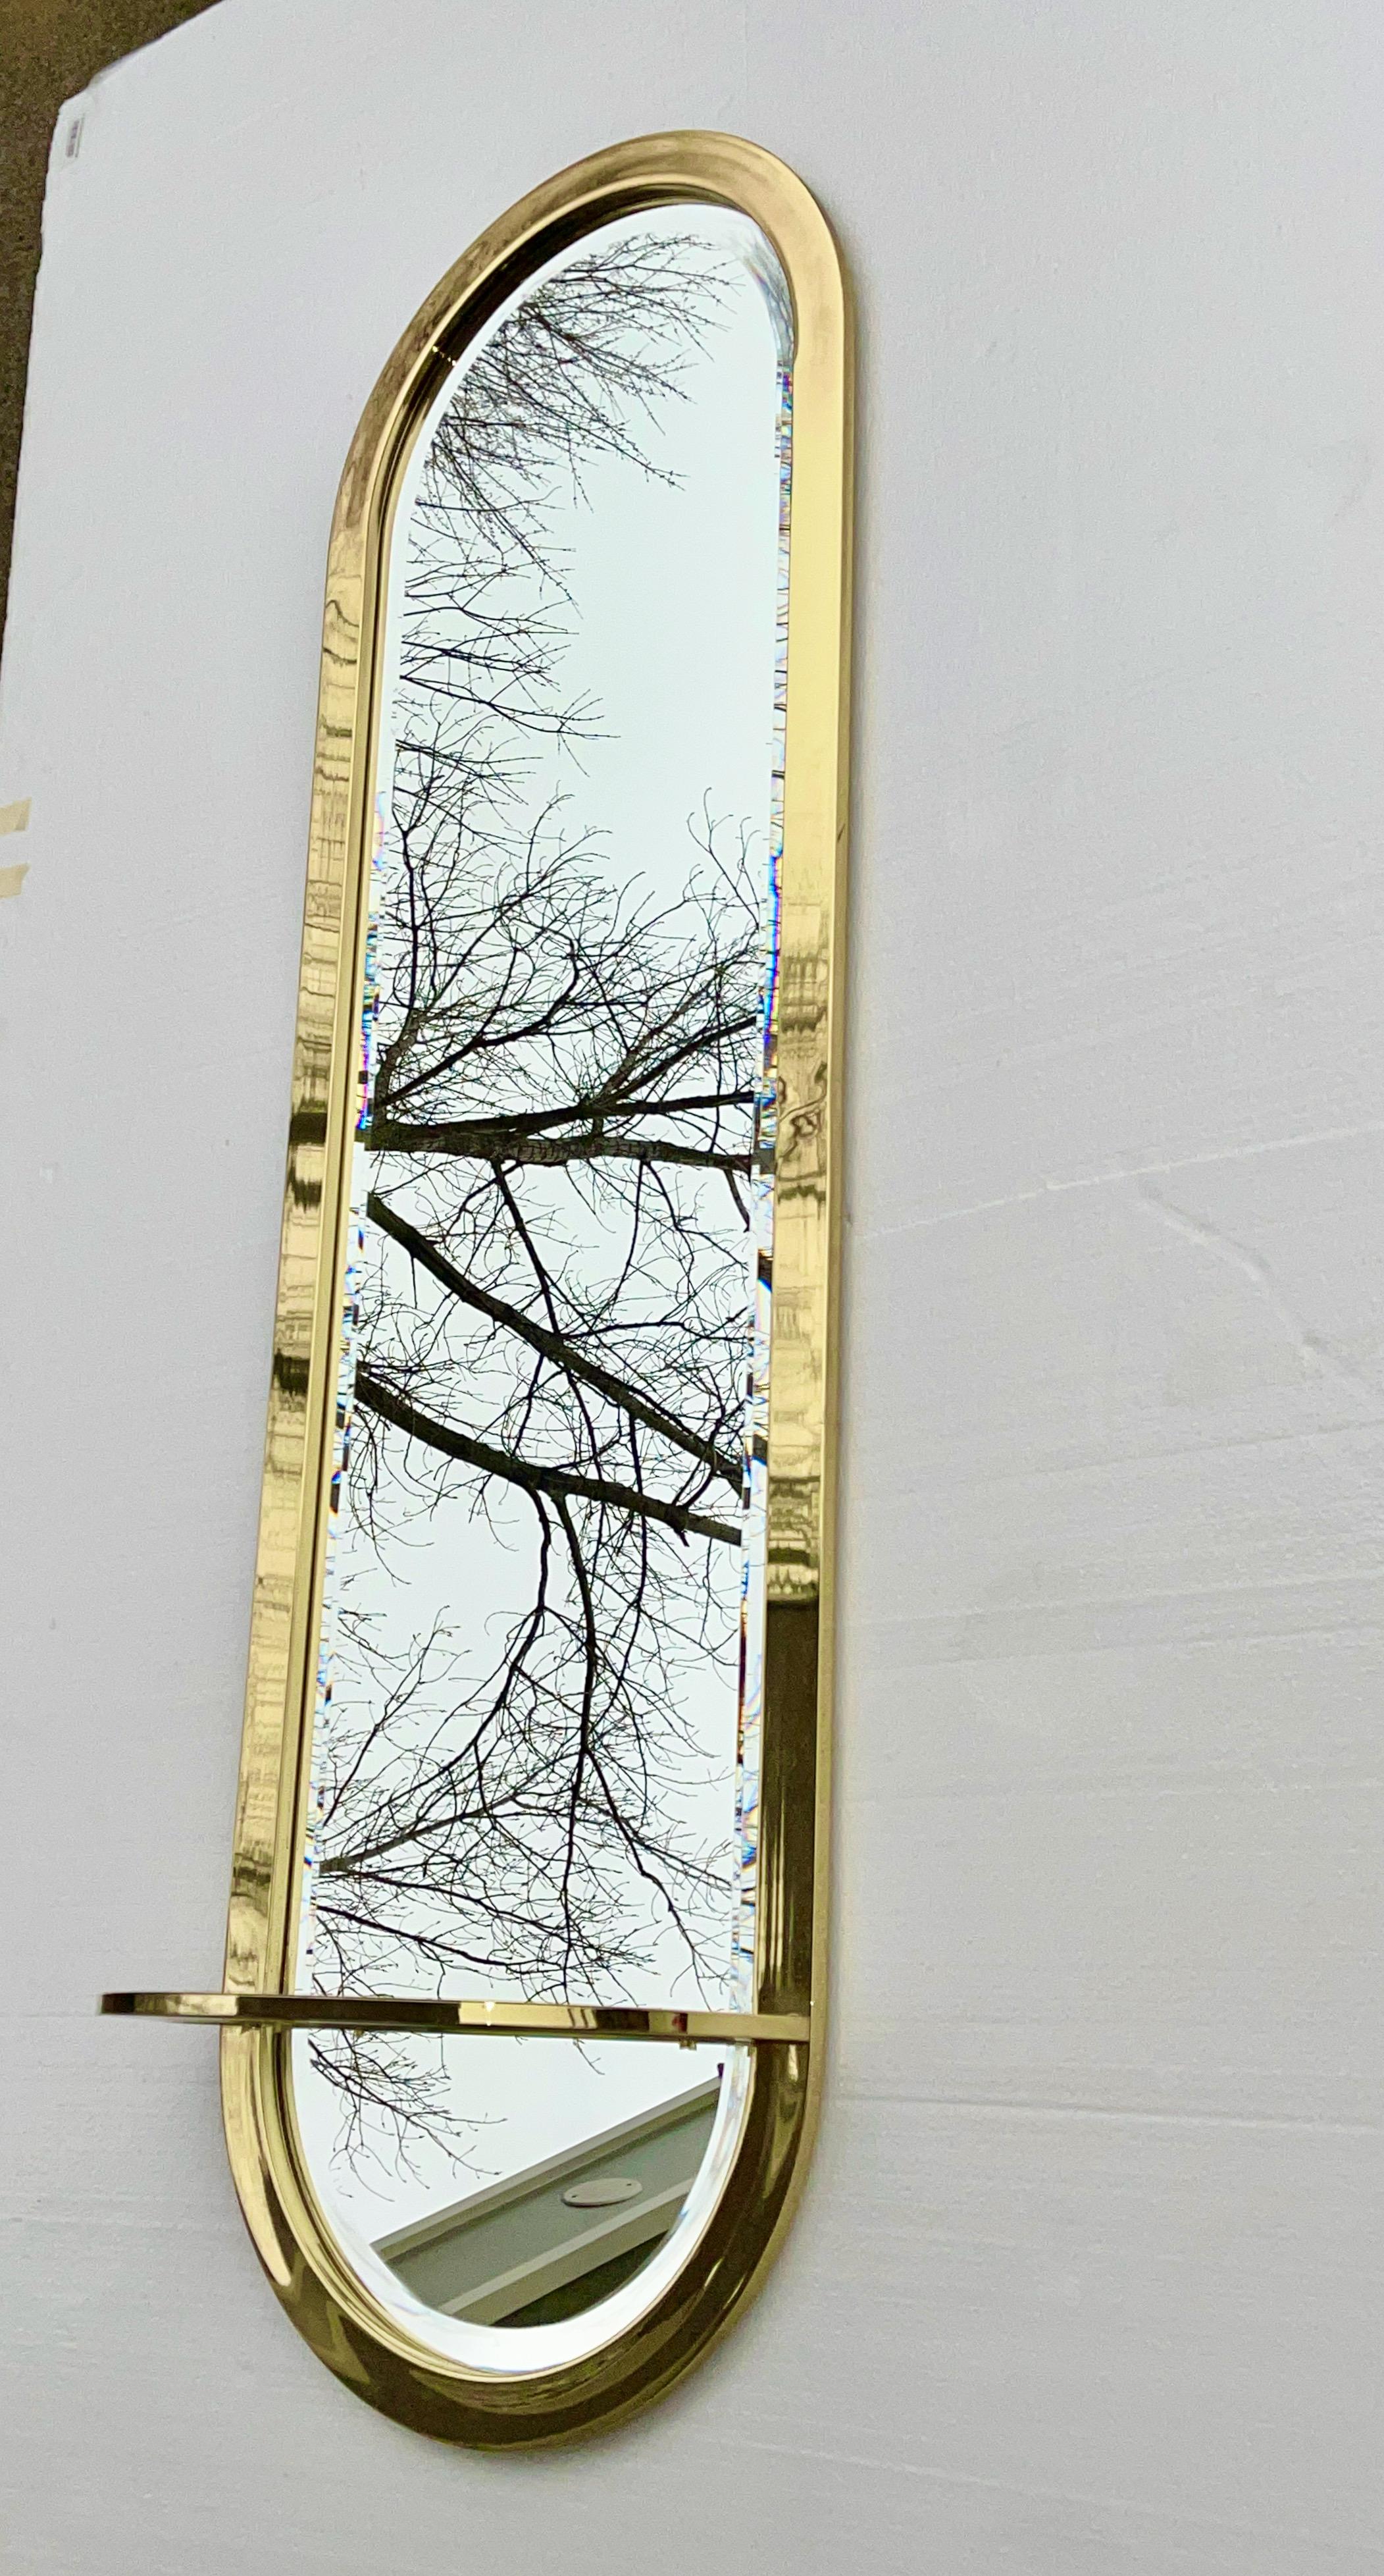 Vintage 1970's DIA vertical wall mirror in racetrack oval form with brass plated framing around the beveled mirror and a demilune console shelf with clear tempered glass insert.

See our separate listing U12022288661500 for a similar mirror